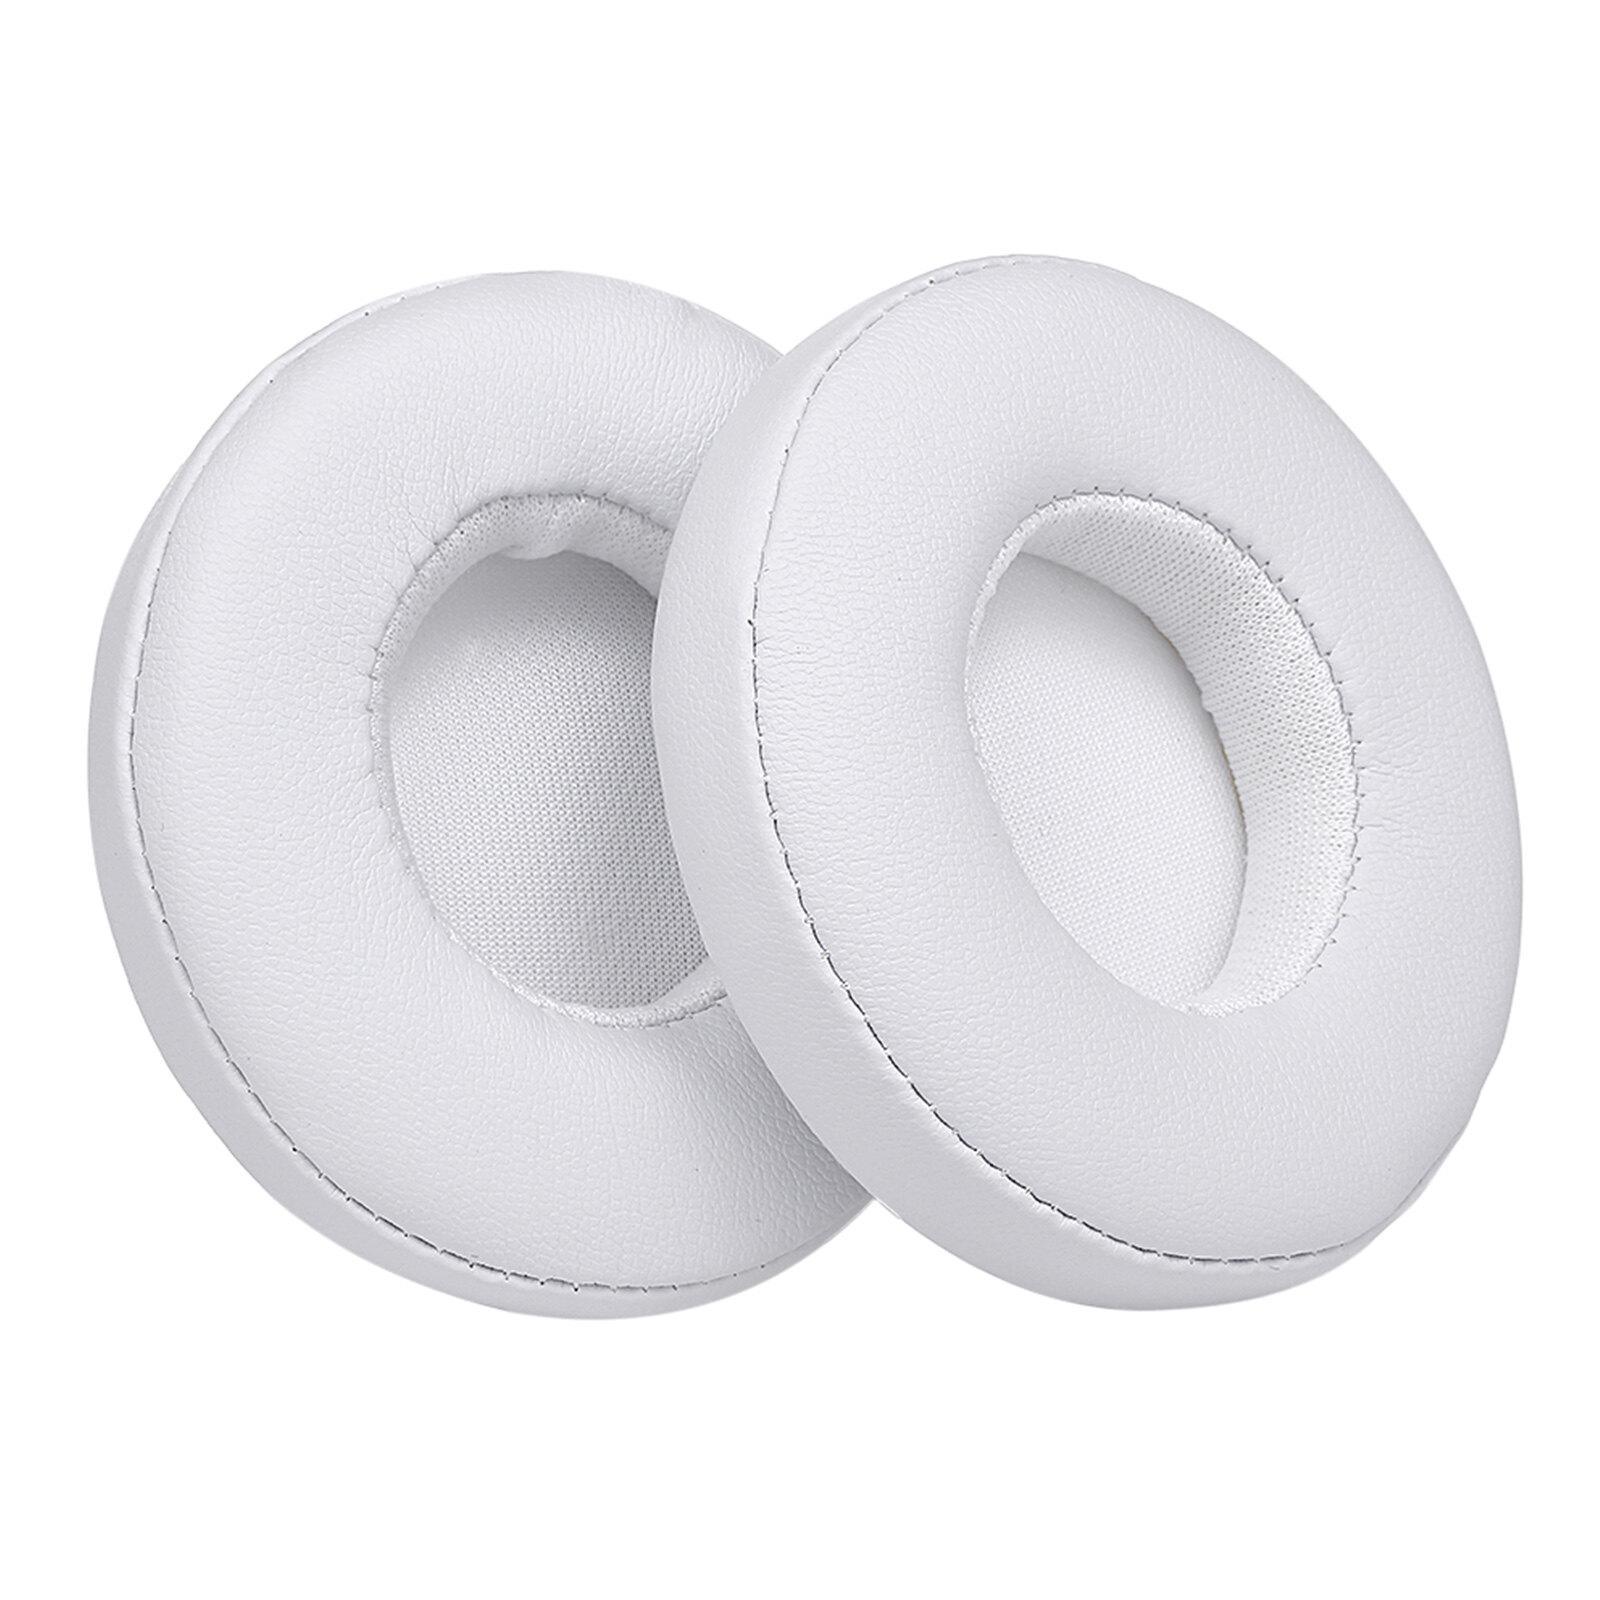 2Pcs Replacement Earpads Ear Pad Cushion for Beats Solo 2 / 3 On Ear Wireless Headphones White